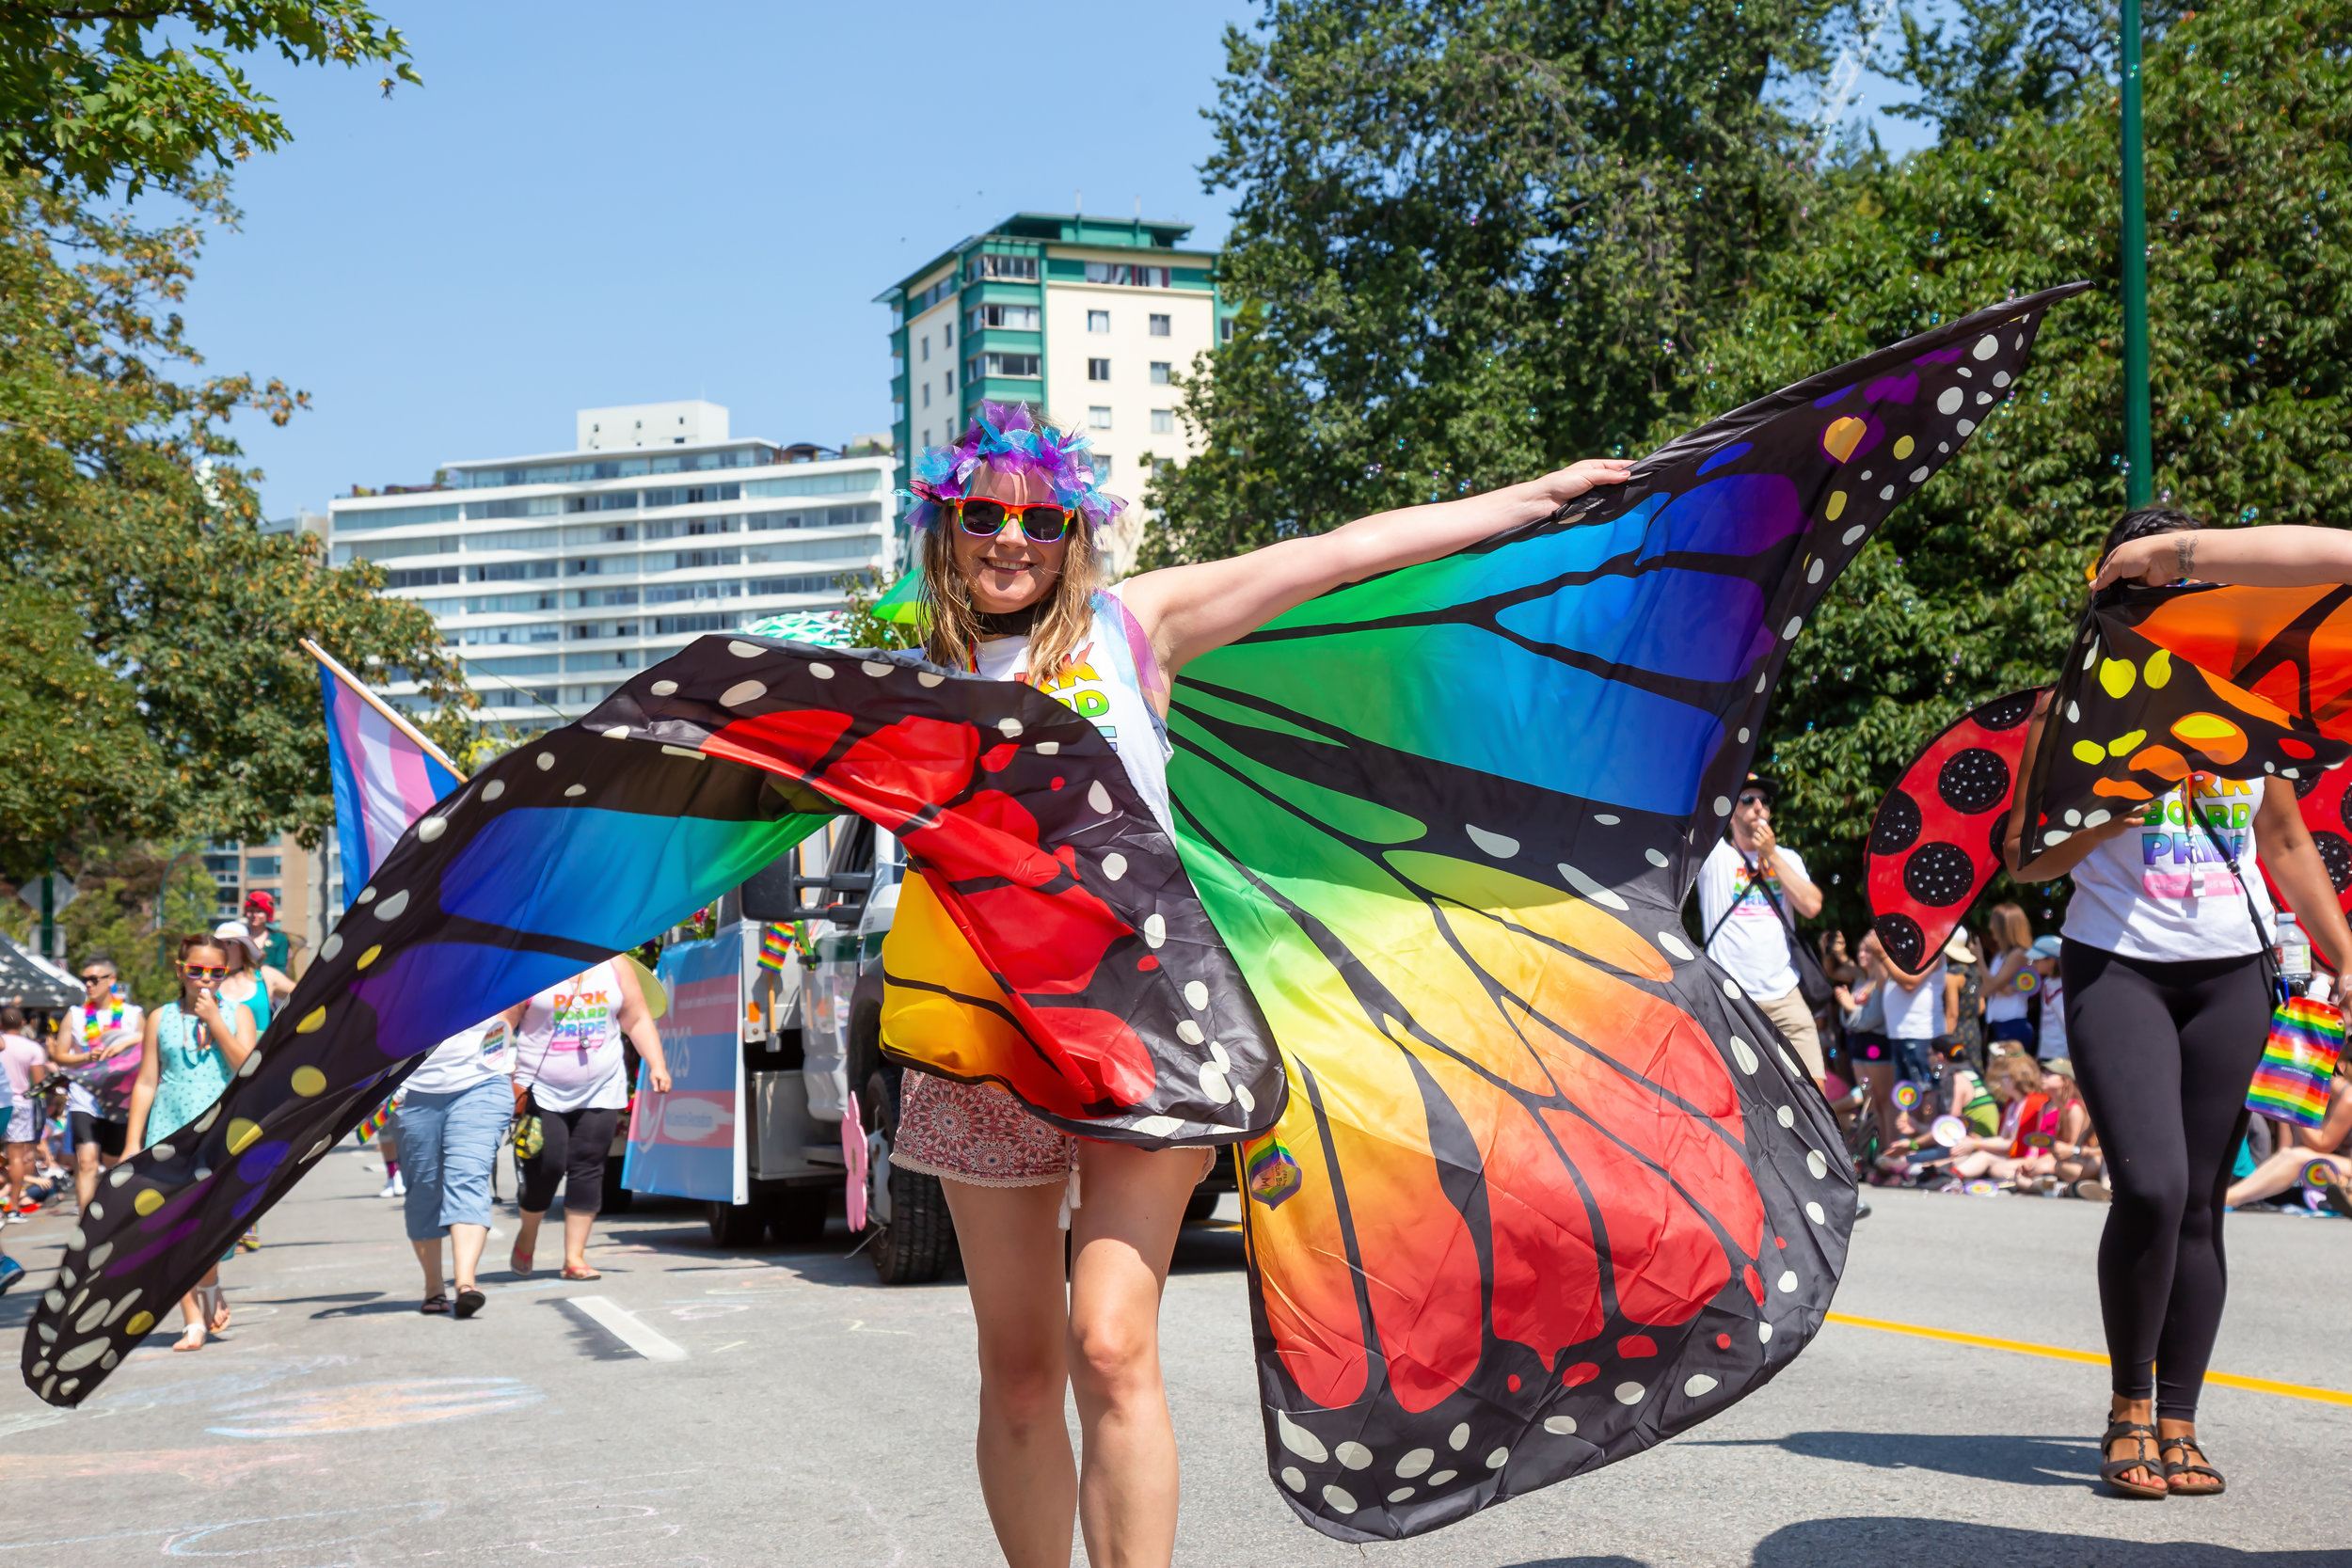 Vancouver Canucks players wear rainbow skirts in LGBT pride parade -  Outsports